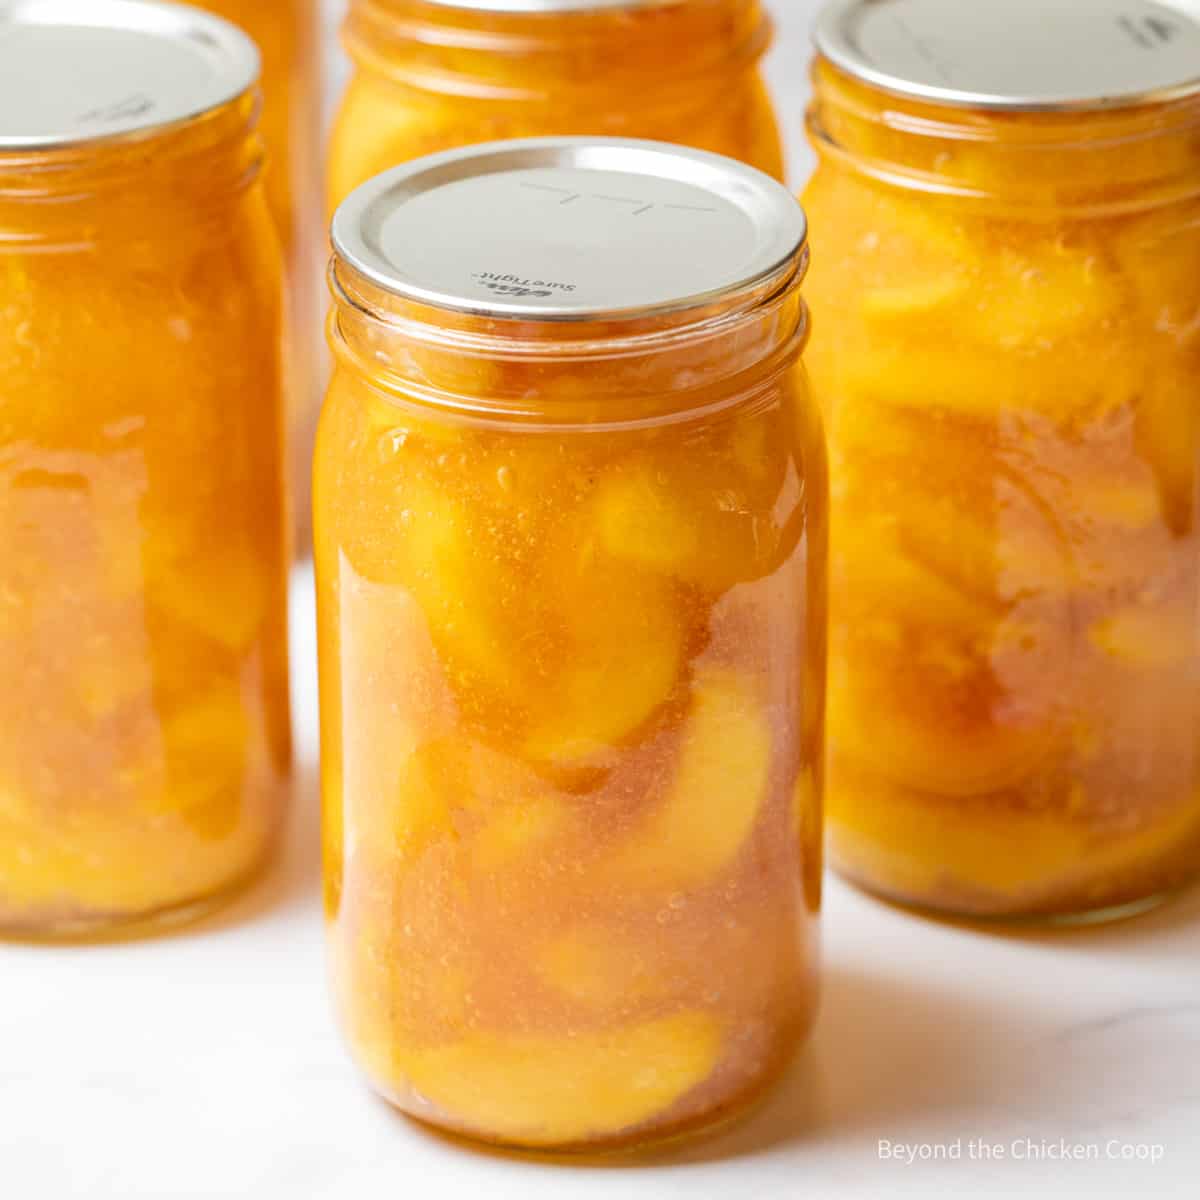 Canning jars filled with sliced peaches.